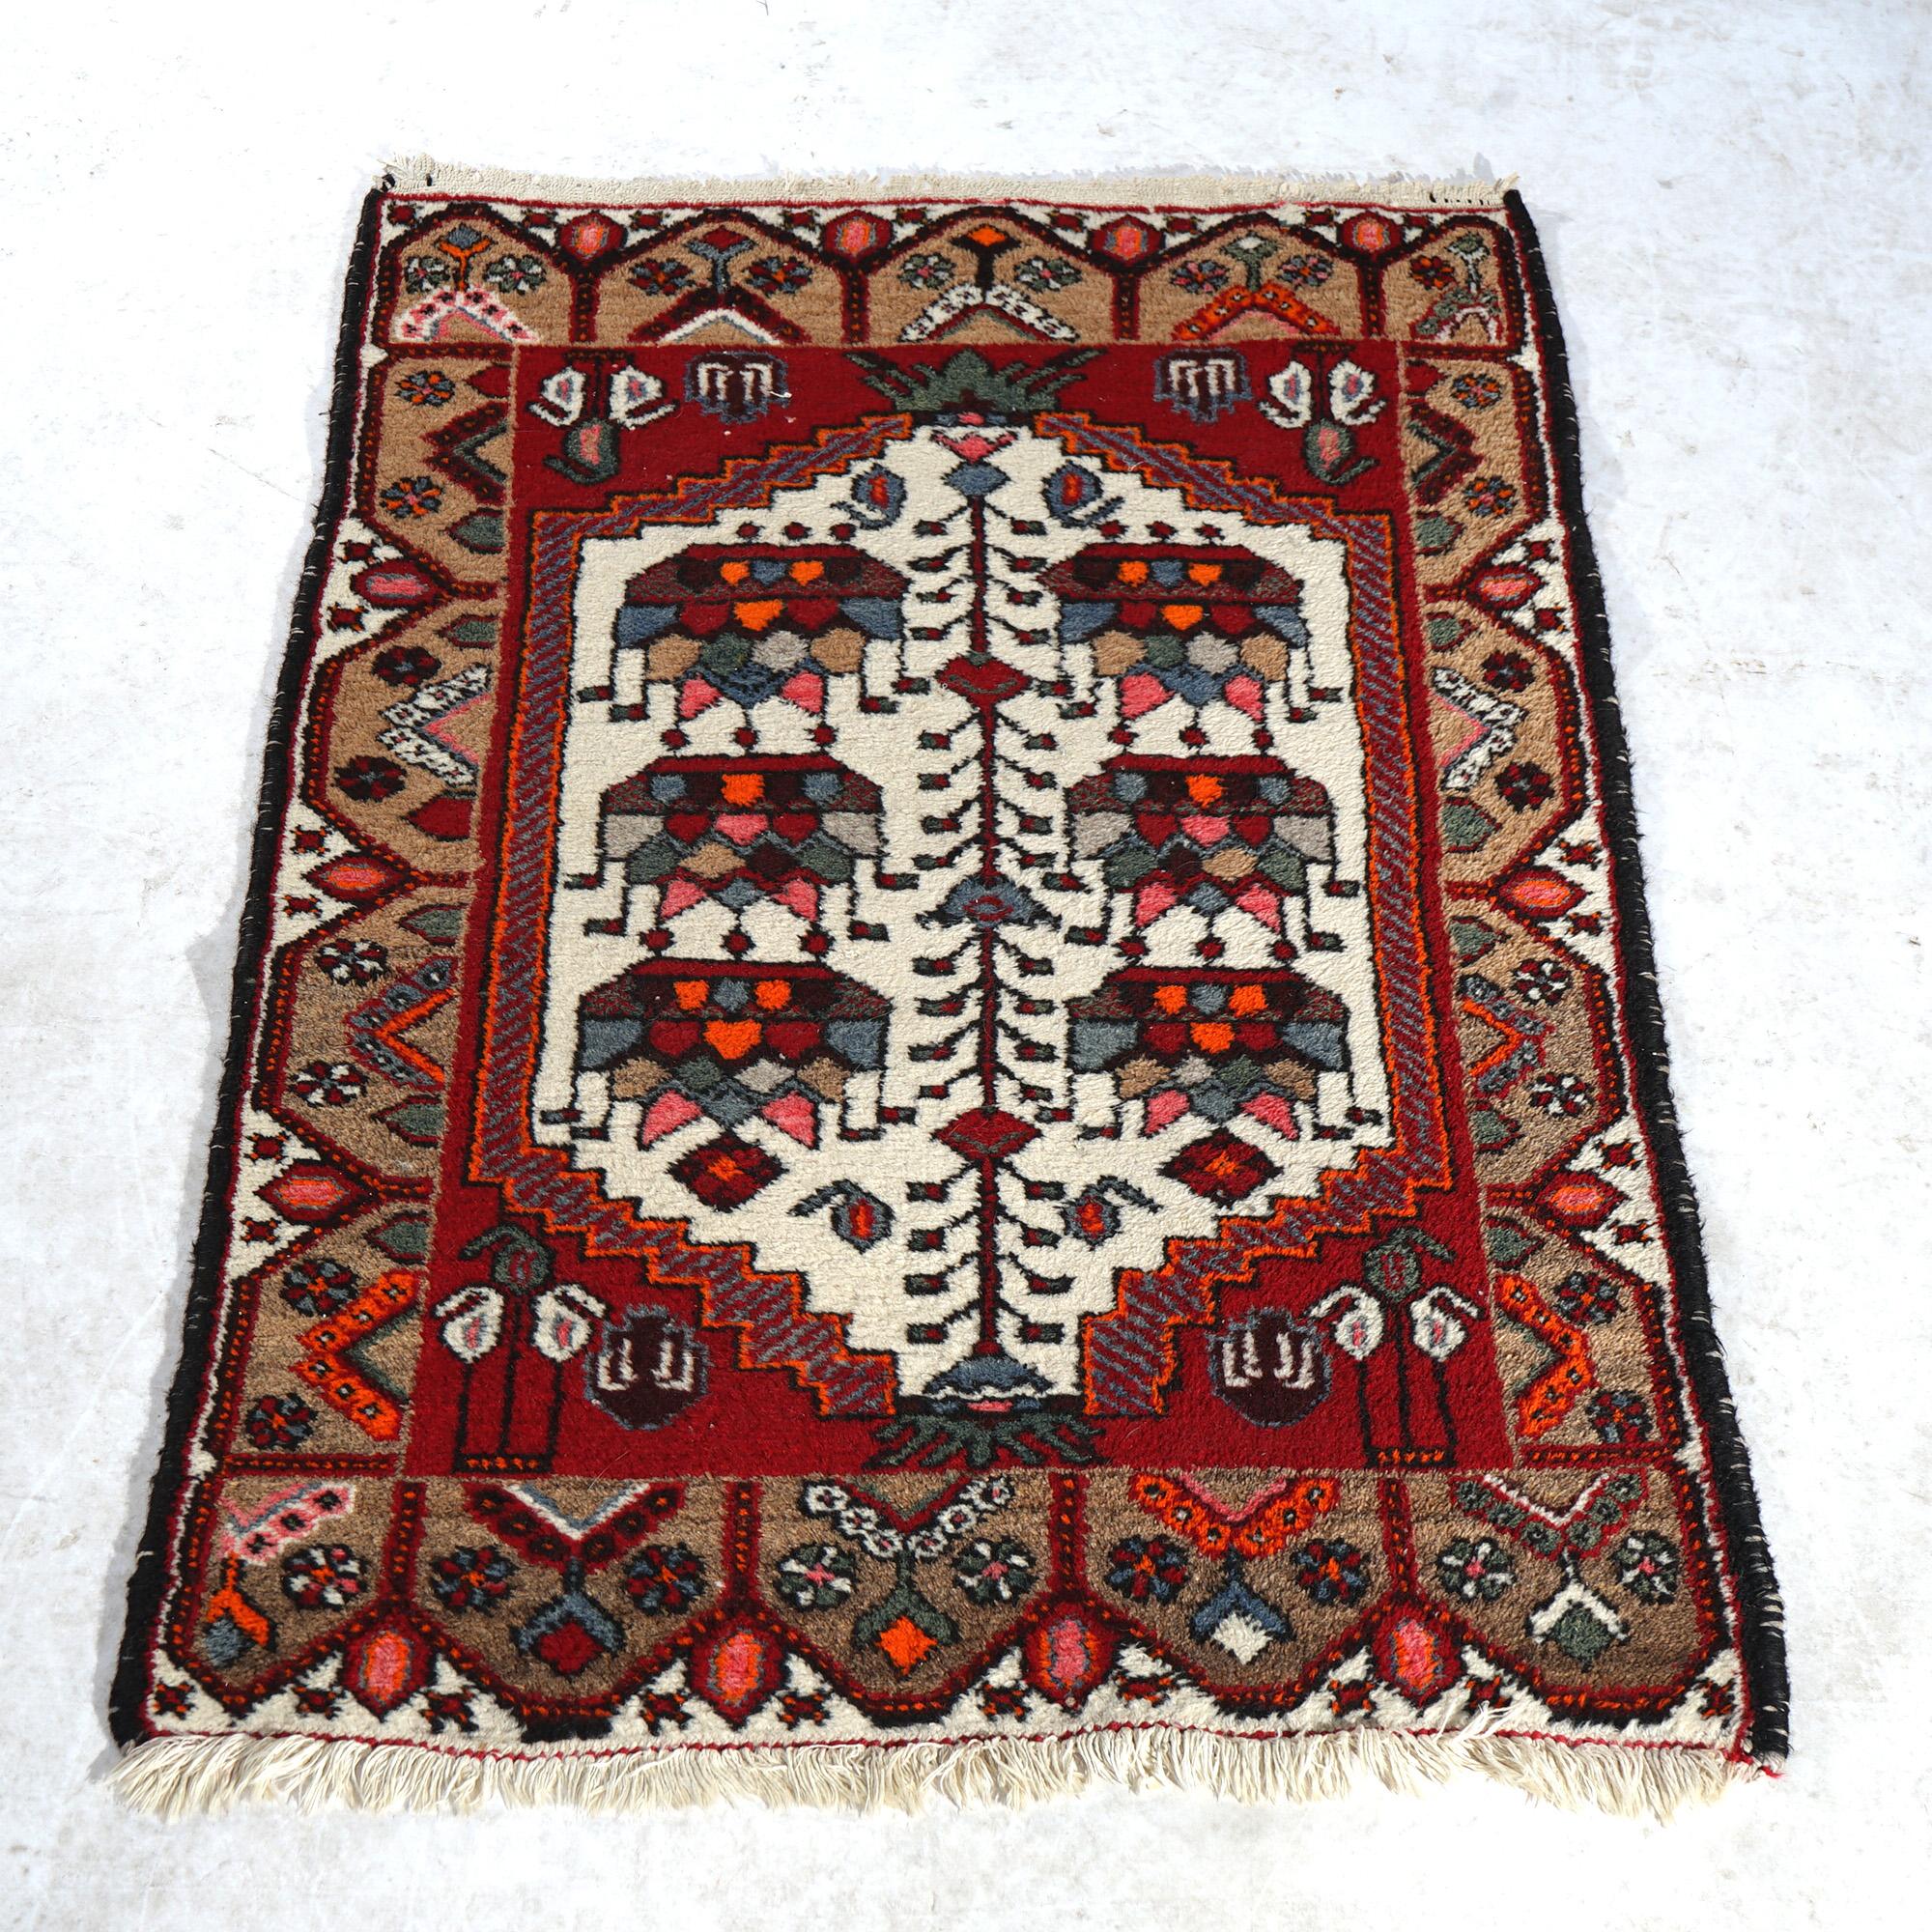 An antique Turkish oriental rug offers wool construction with central medallion having stylized floral elements, circa 1930

Measures - 49.5